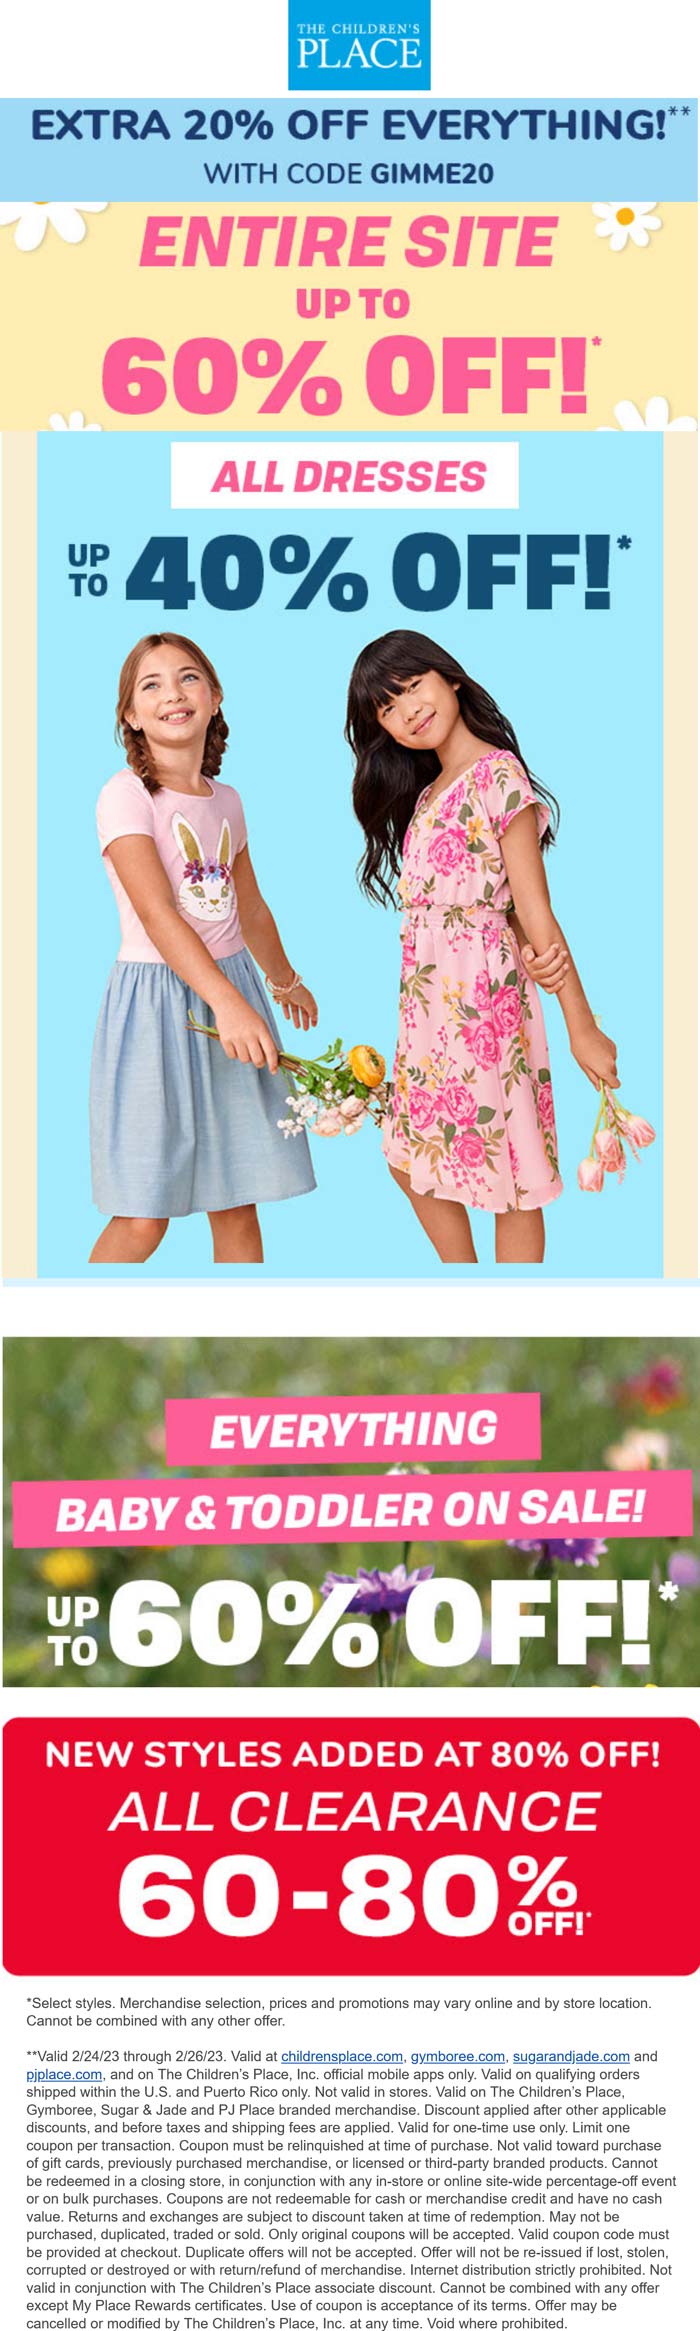 The Childrens Place stores Coupon  Extra 20% off everything online at The Childrens Place via promo code GIMME20 #thechildrensplace 